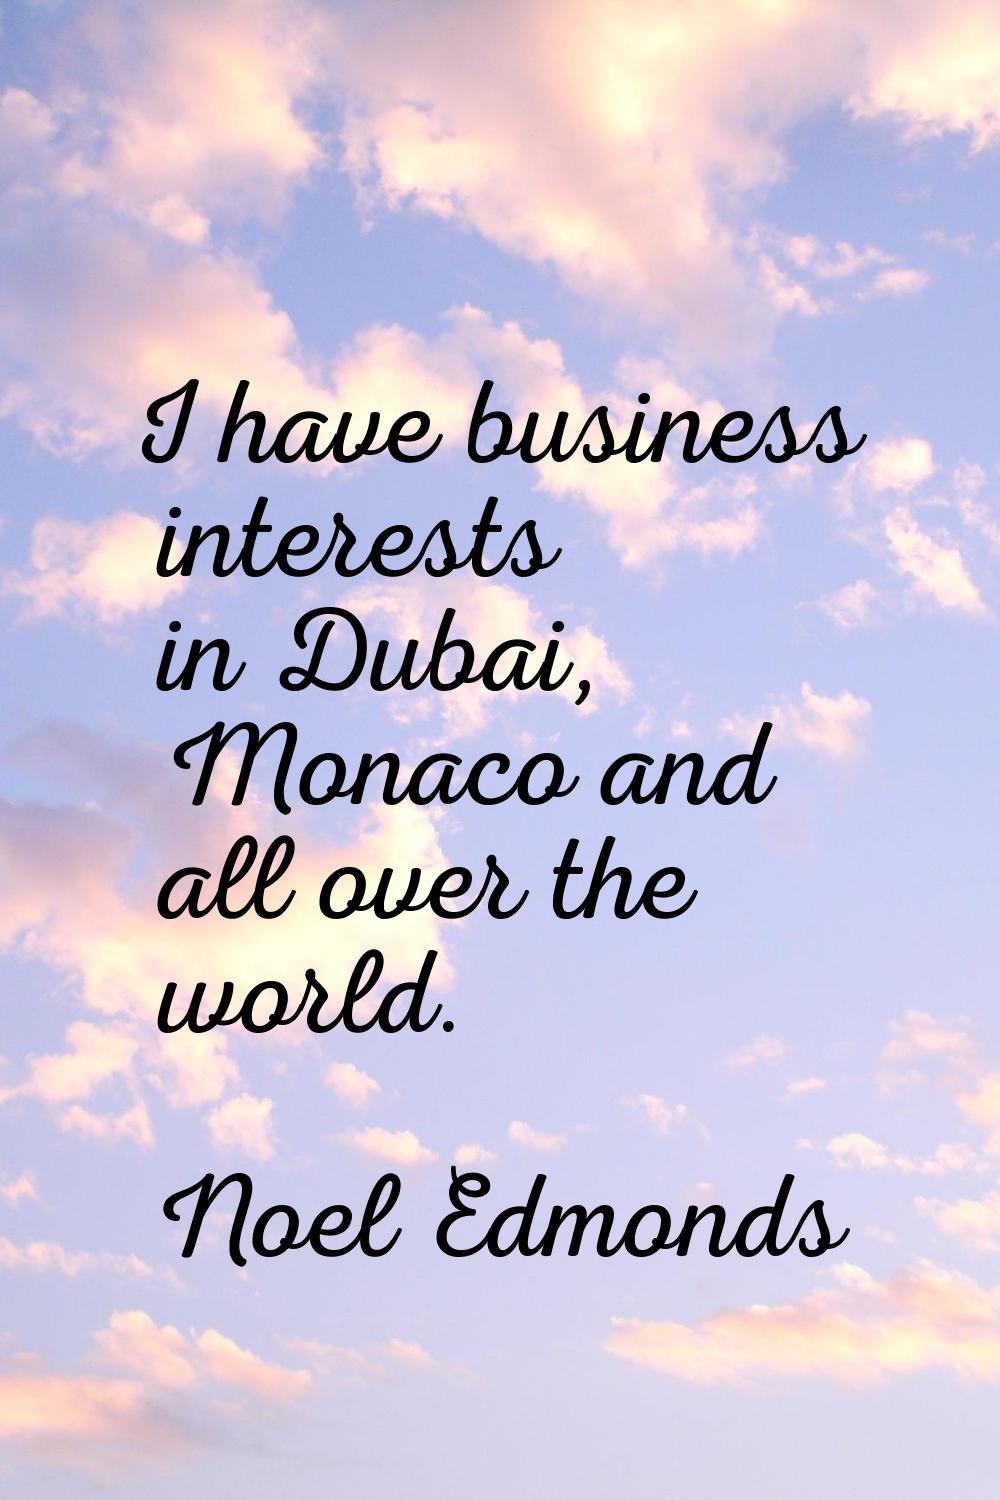 I have business interests in Dubai, Monaco and all over the world.